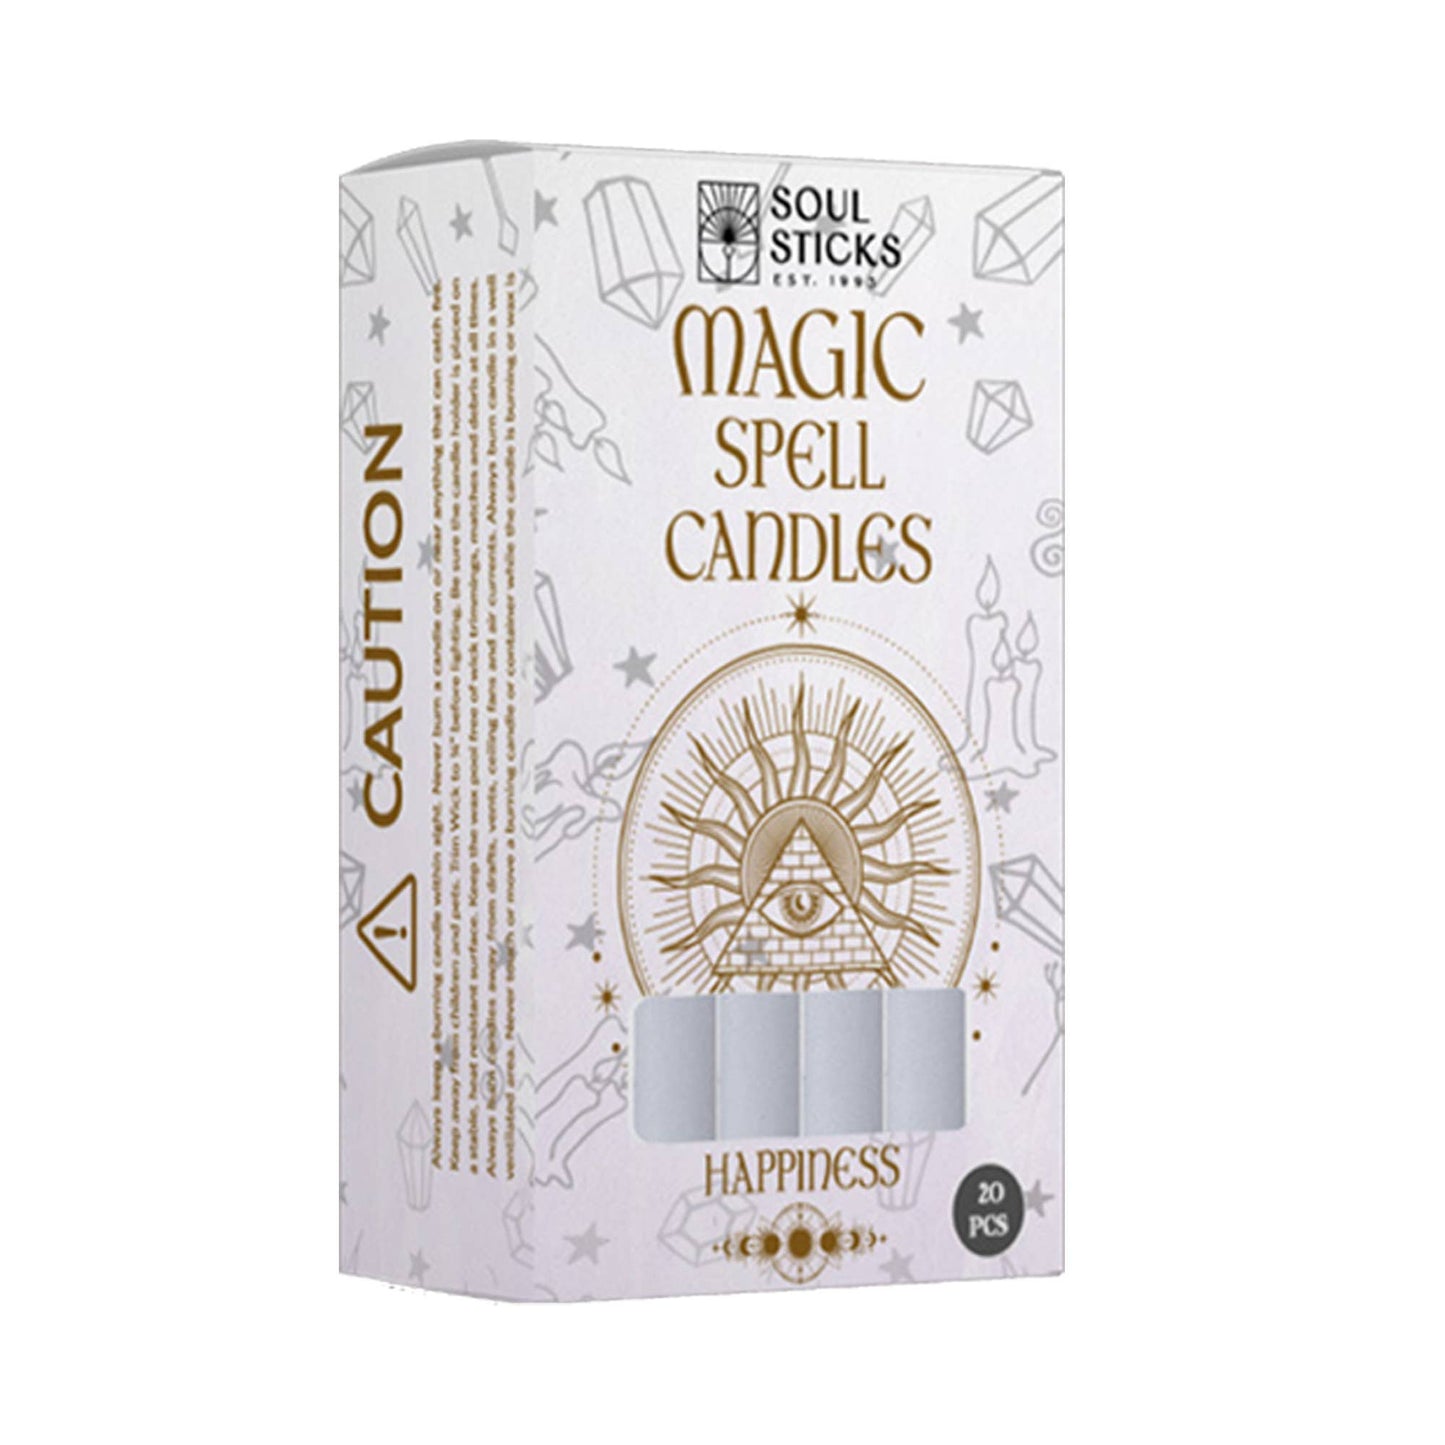 Happiness Soul Sticks Magic Spell Chime Ritual Candles